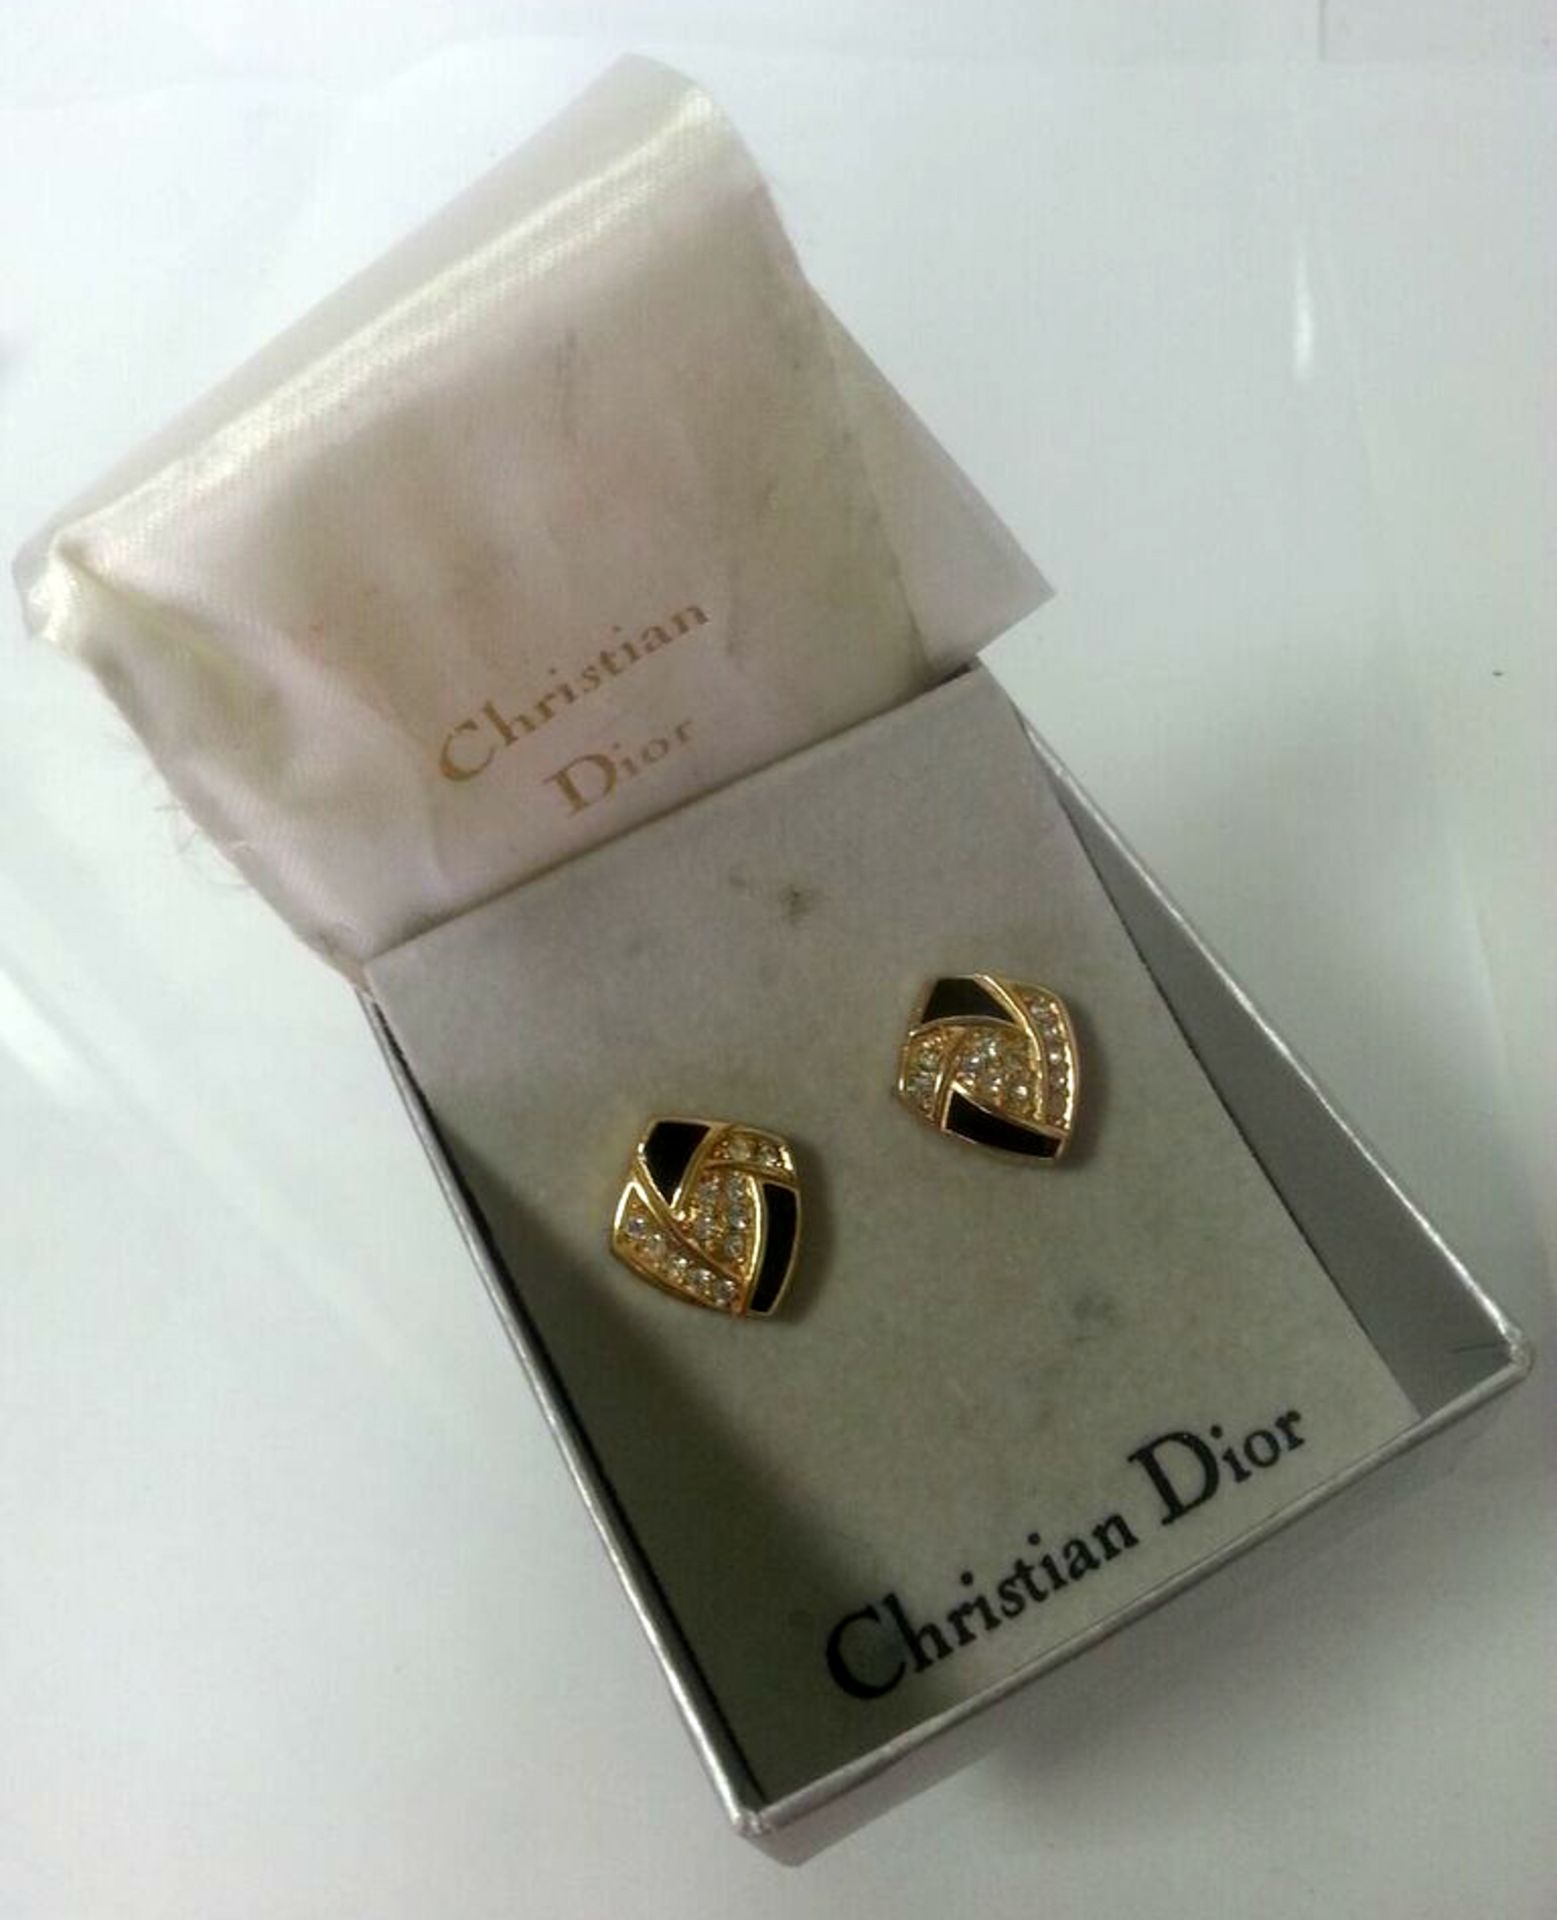 VINTAGE BOXED DESIGNER EARRINGS BY CHRISTIAN DIOR. Low cost delivery available on all items. This is